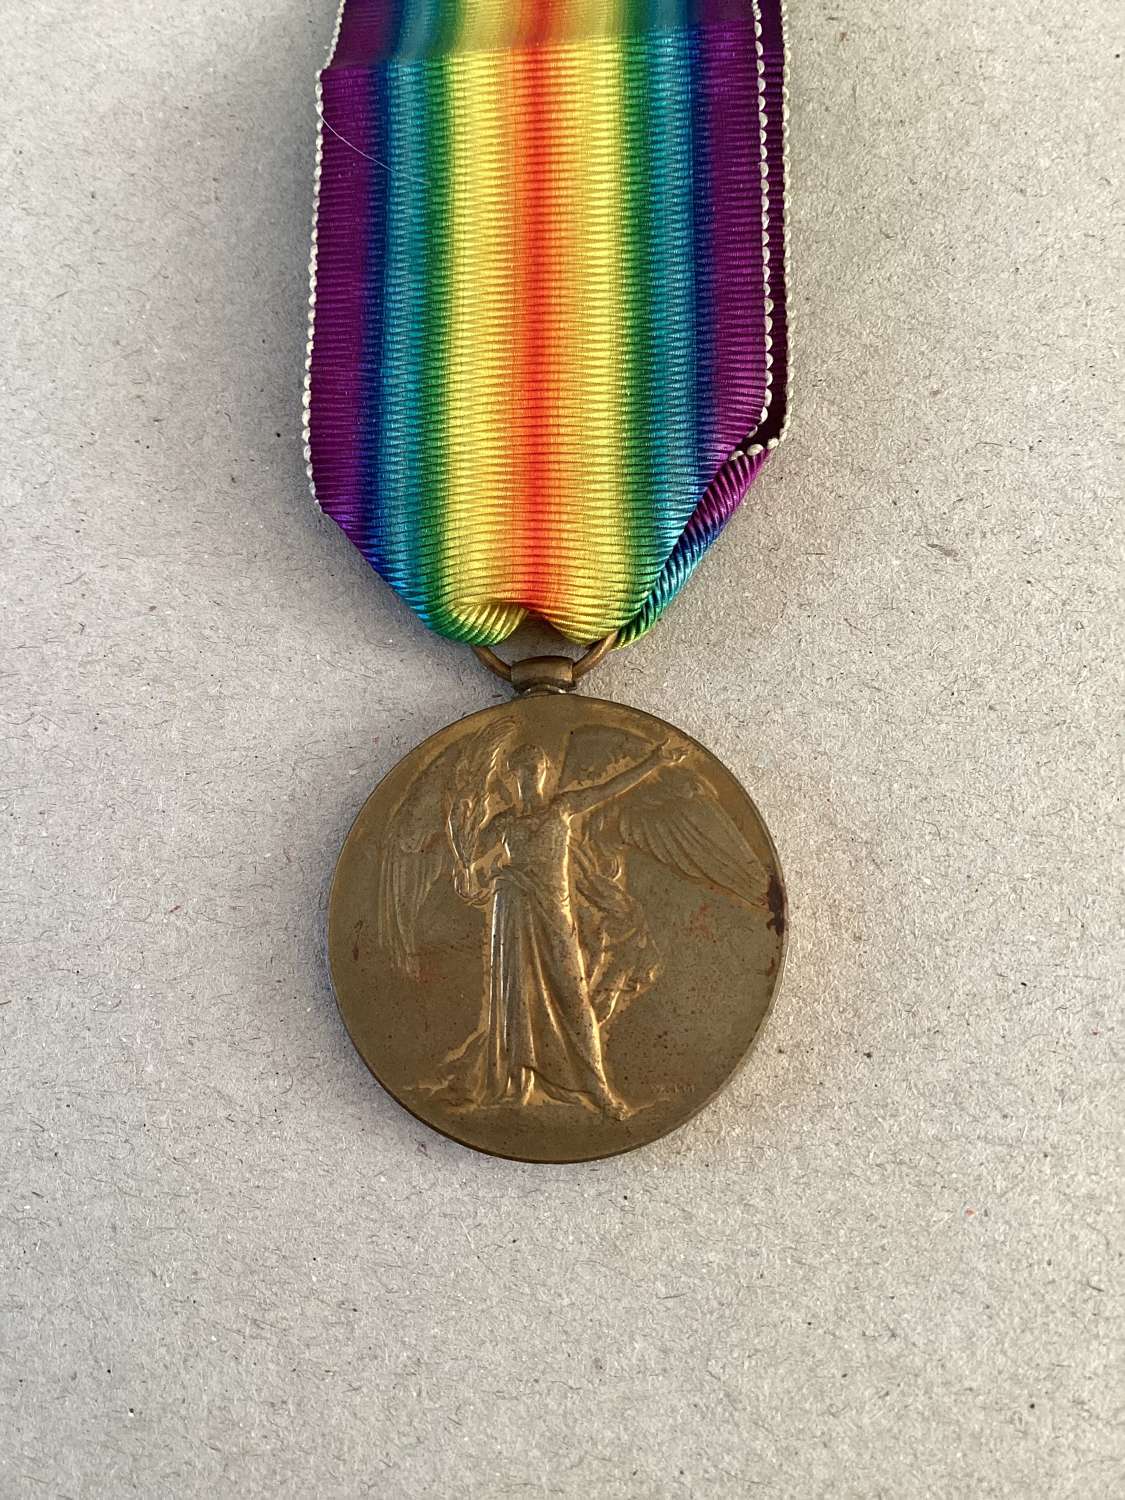 Victory Medal named 36863 Pte C F Shaw MGC, Died of Wounds